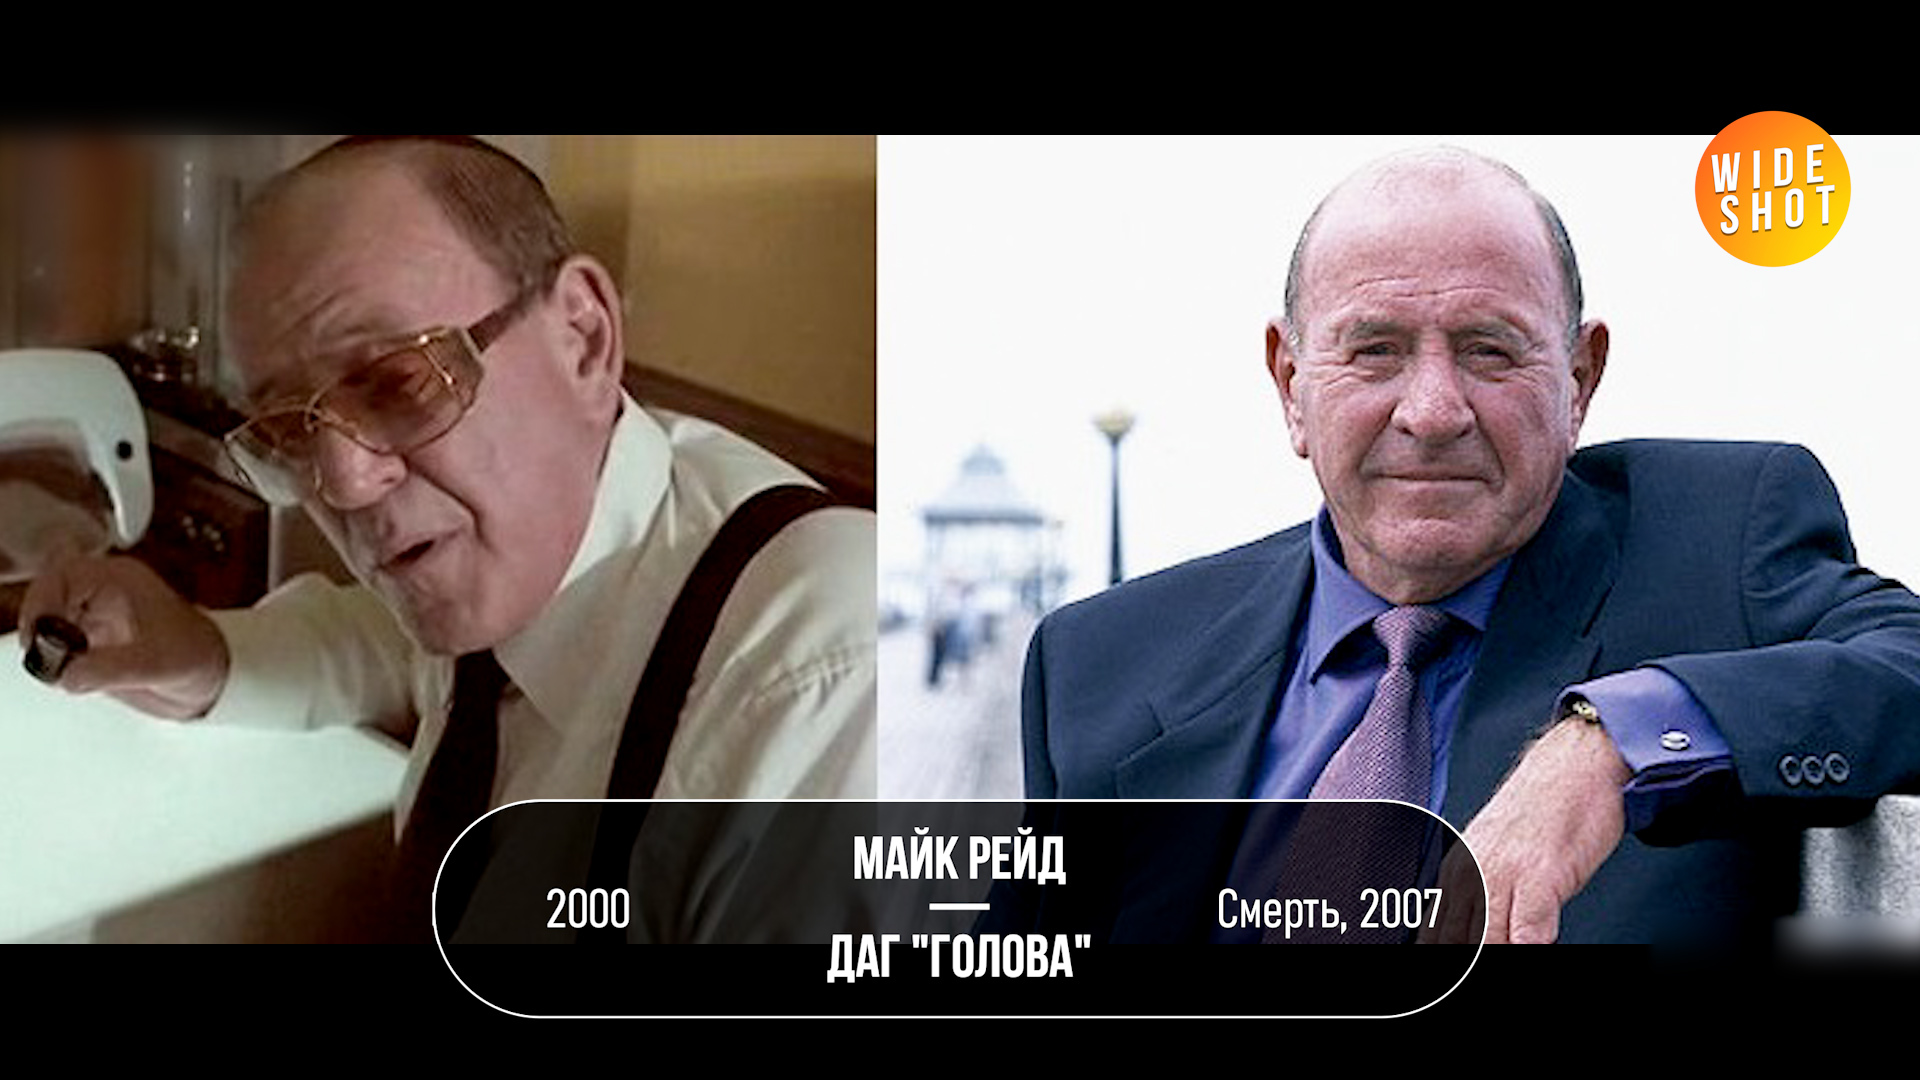 BIG JACKPOT (2000): ACTORS THEN AND NOW (22 YEARS LATER!) - Hollywood, Actors and actresses, Video review, Movies, Guy Ritchie, Big jackpot, Crime films, Comedy, 2000s, Dmitry Puchkov, I advise you to look, It Was-It Was, Celebrities, What to see, Video, Youtube, Longpost, 